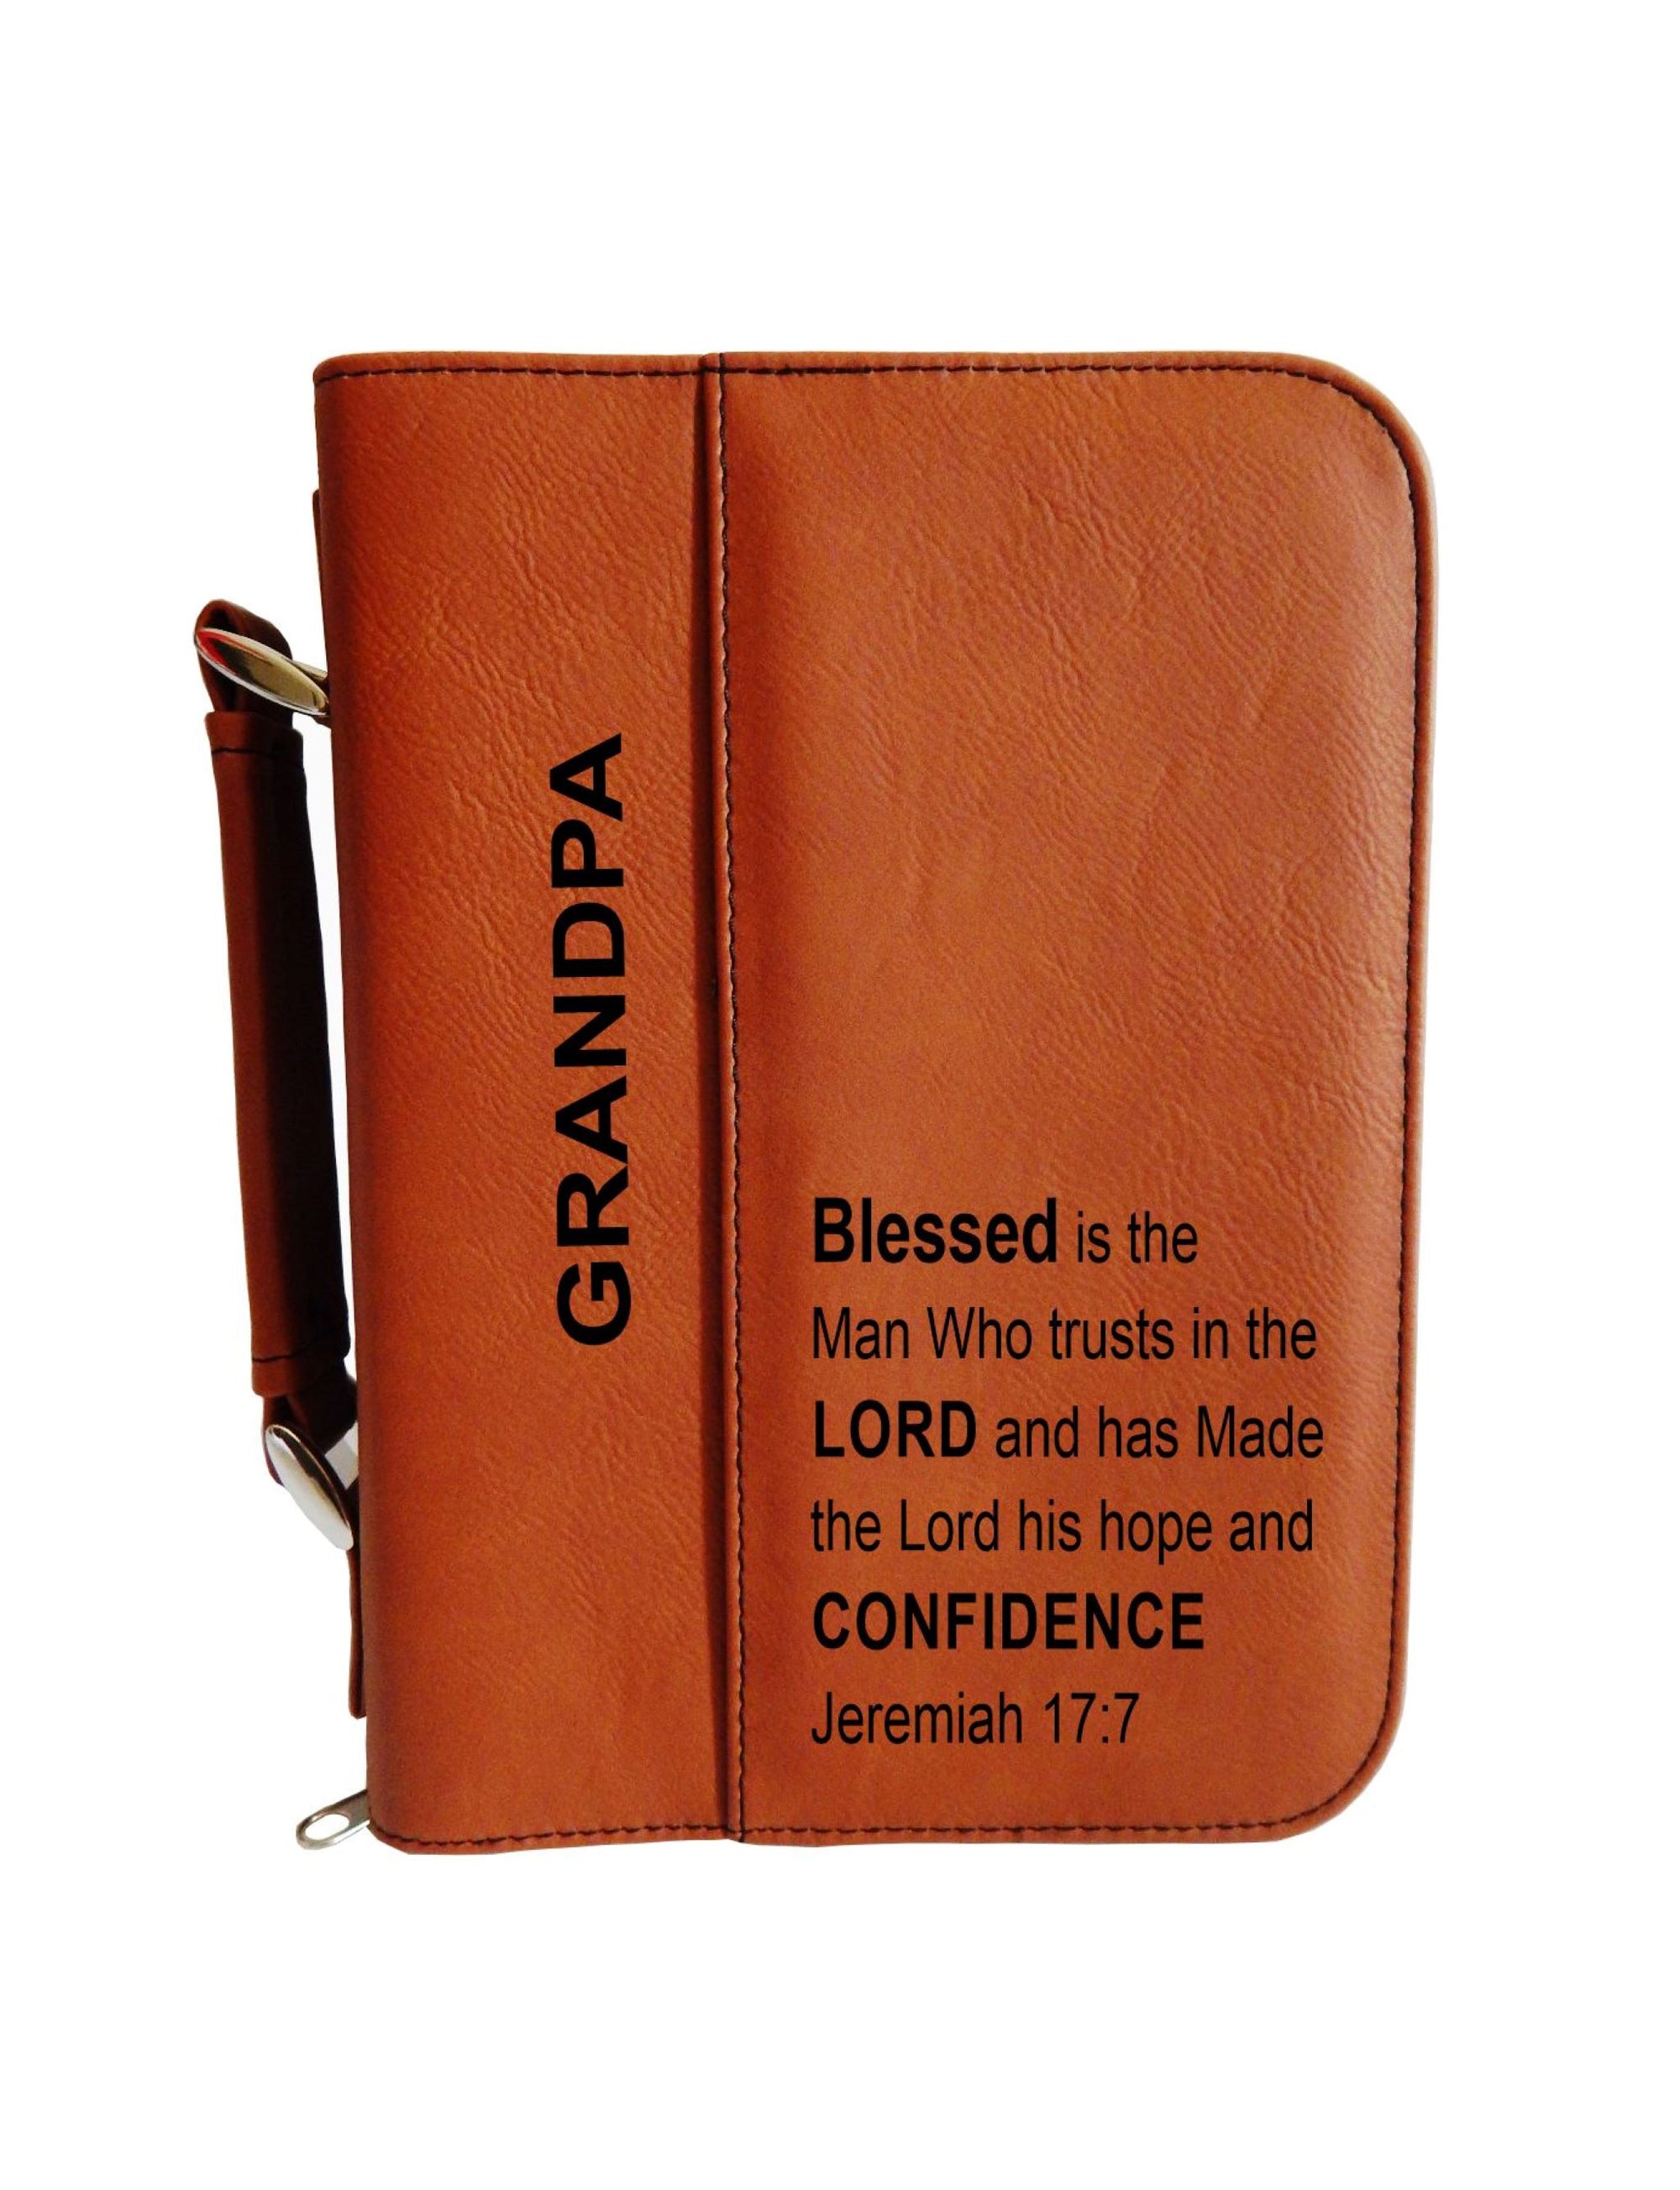 Grandfather Gift | Religious Gifts for Grandpa | Engraved Bible Cover BCL031